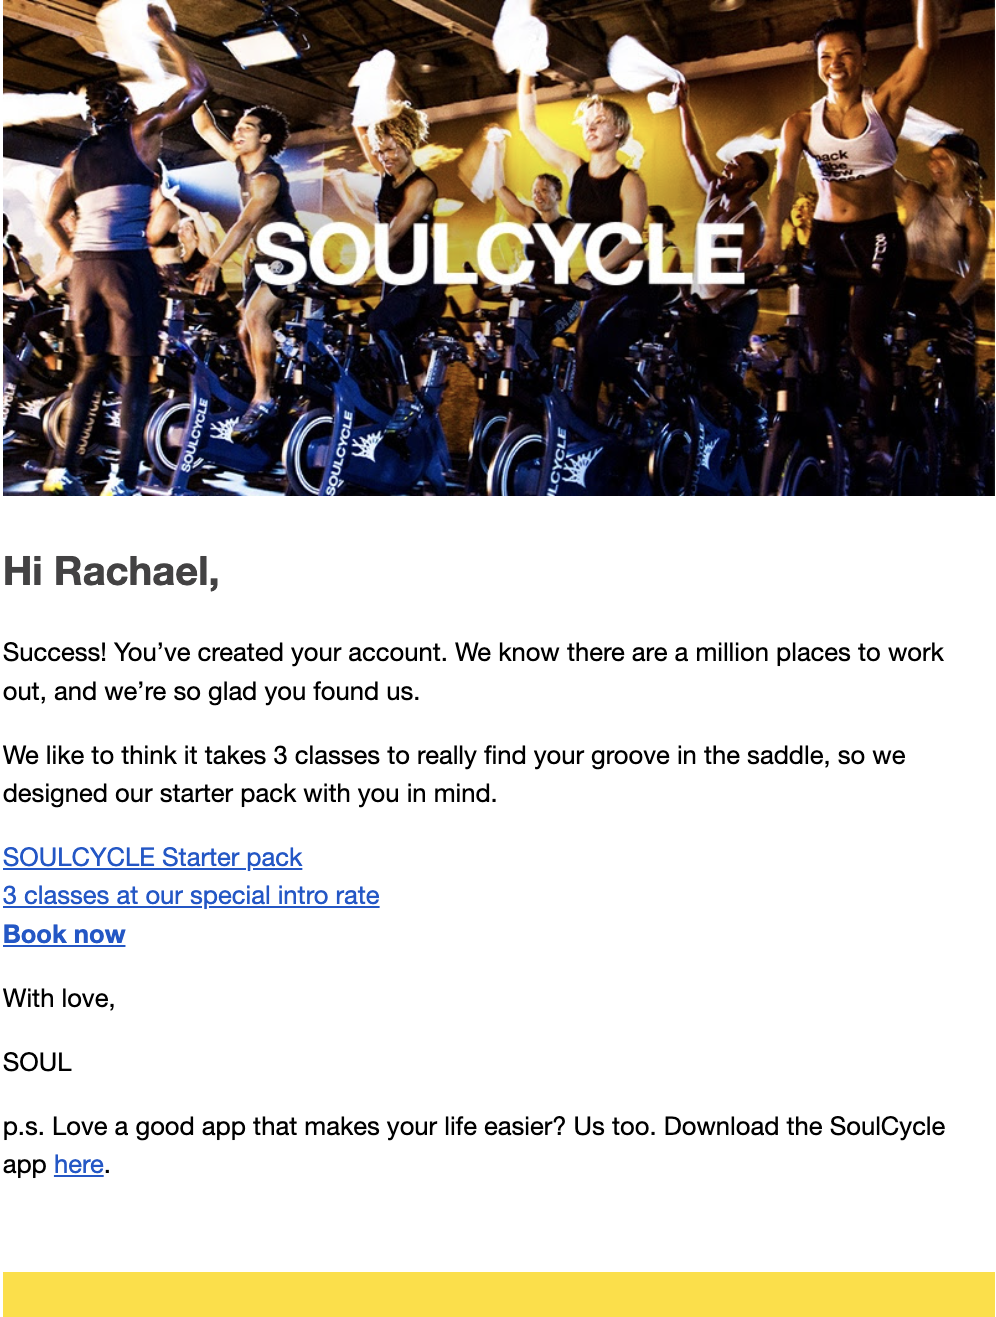 Soulcycle introduction email